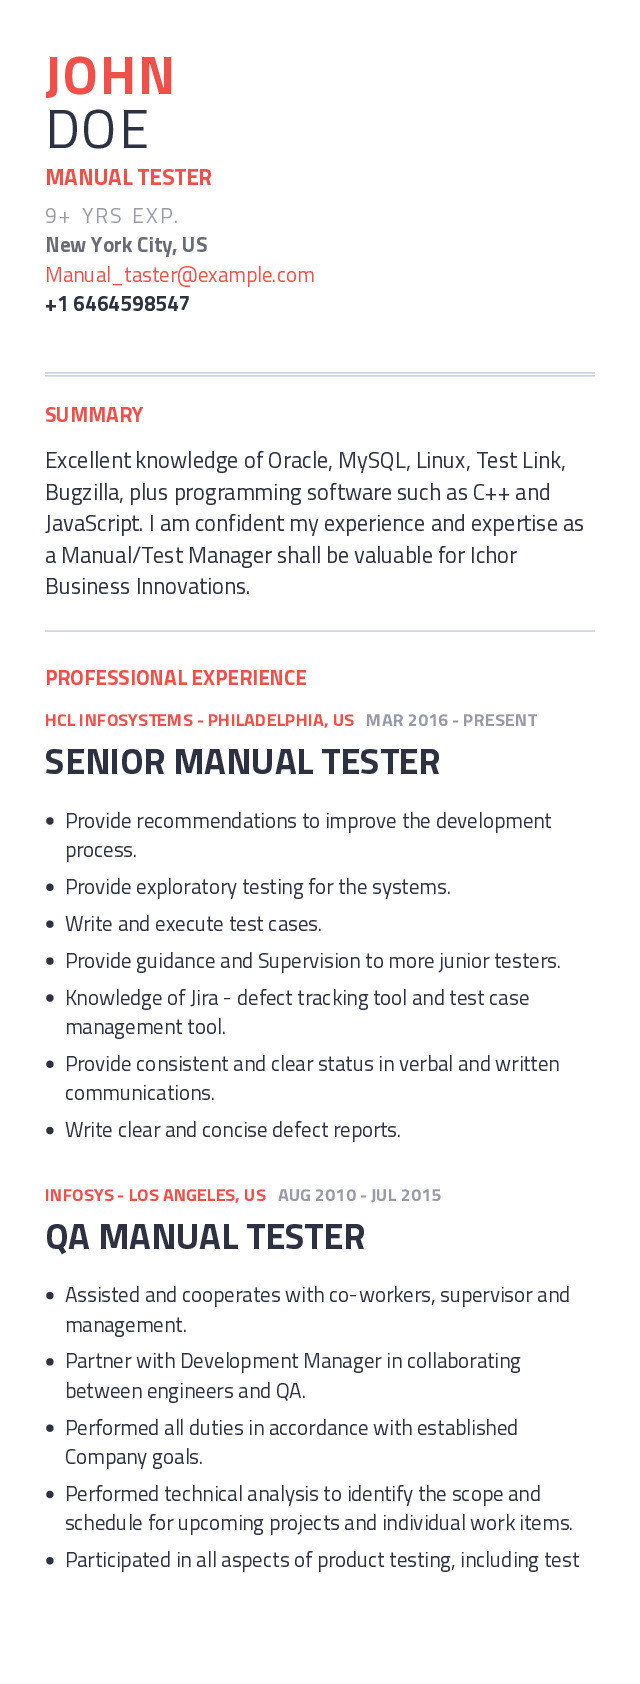 Sample Resume for Qa Manual Tester Manual Tester Resume Example with Content Sample Craftmycv